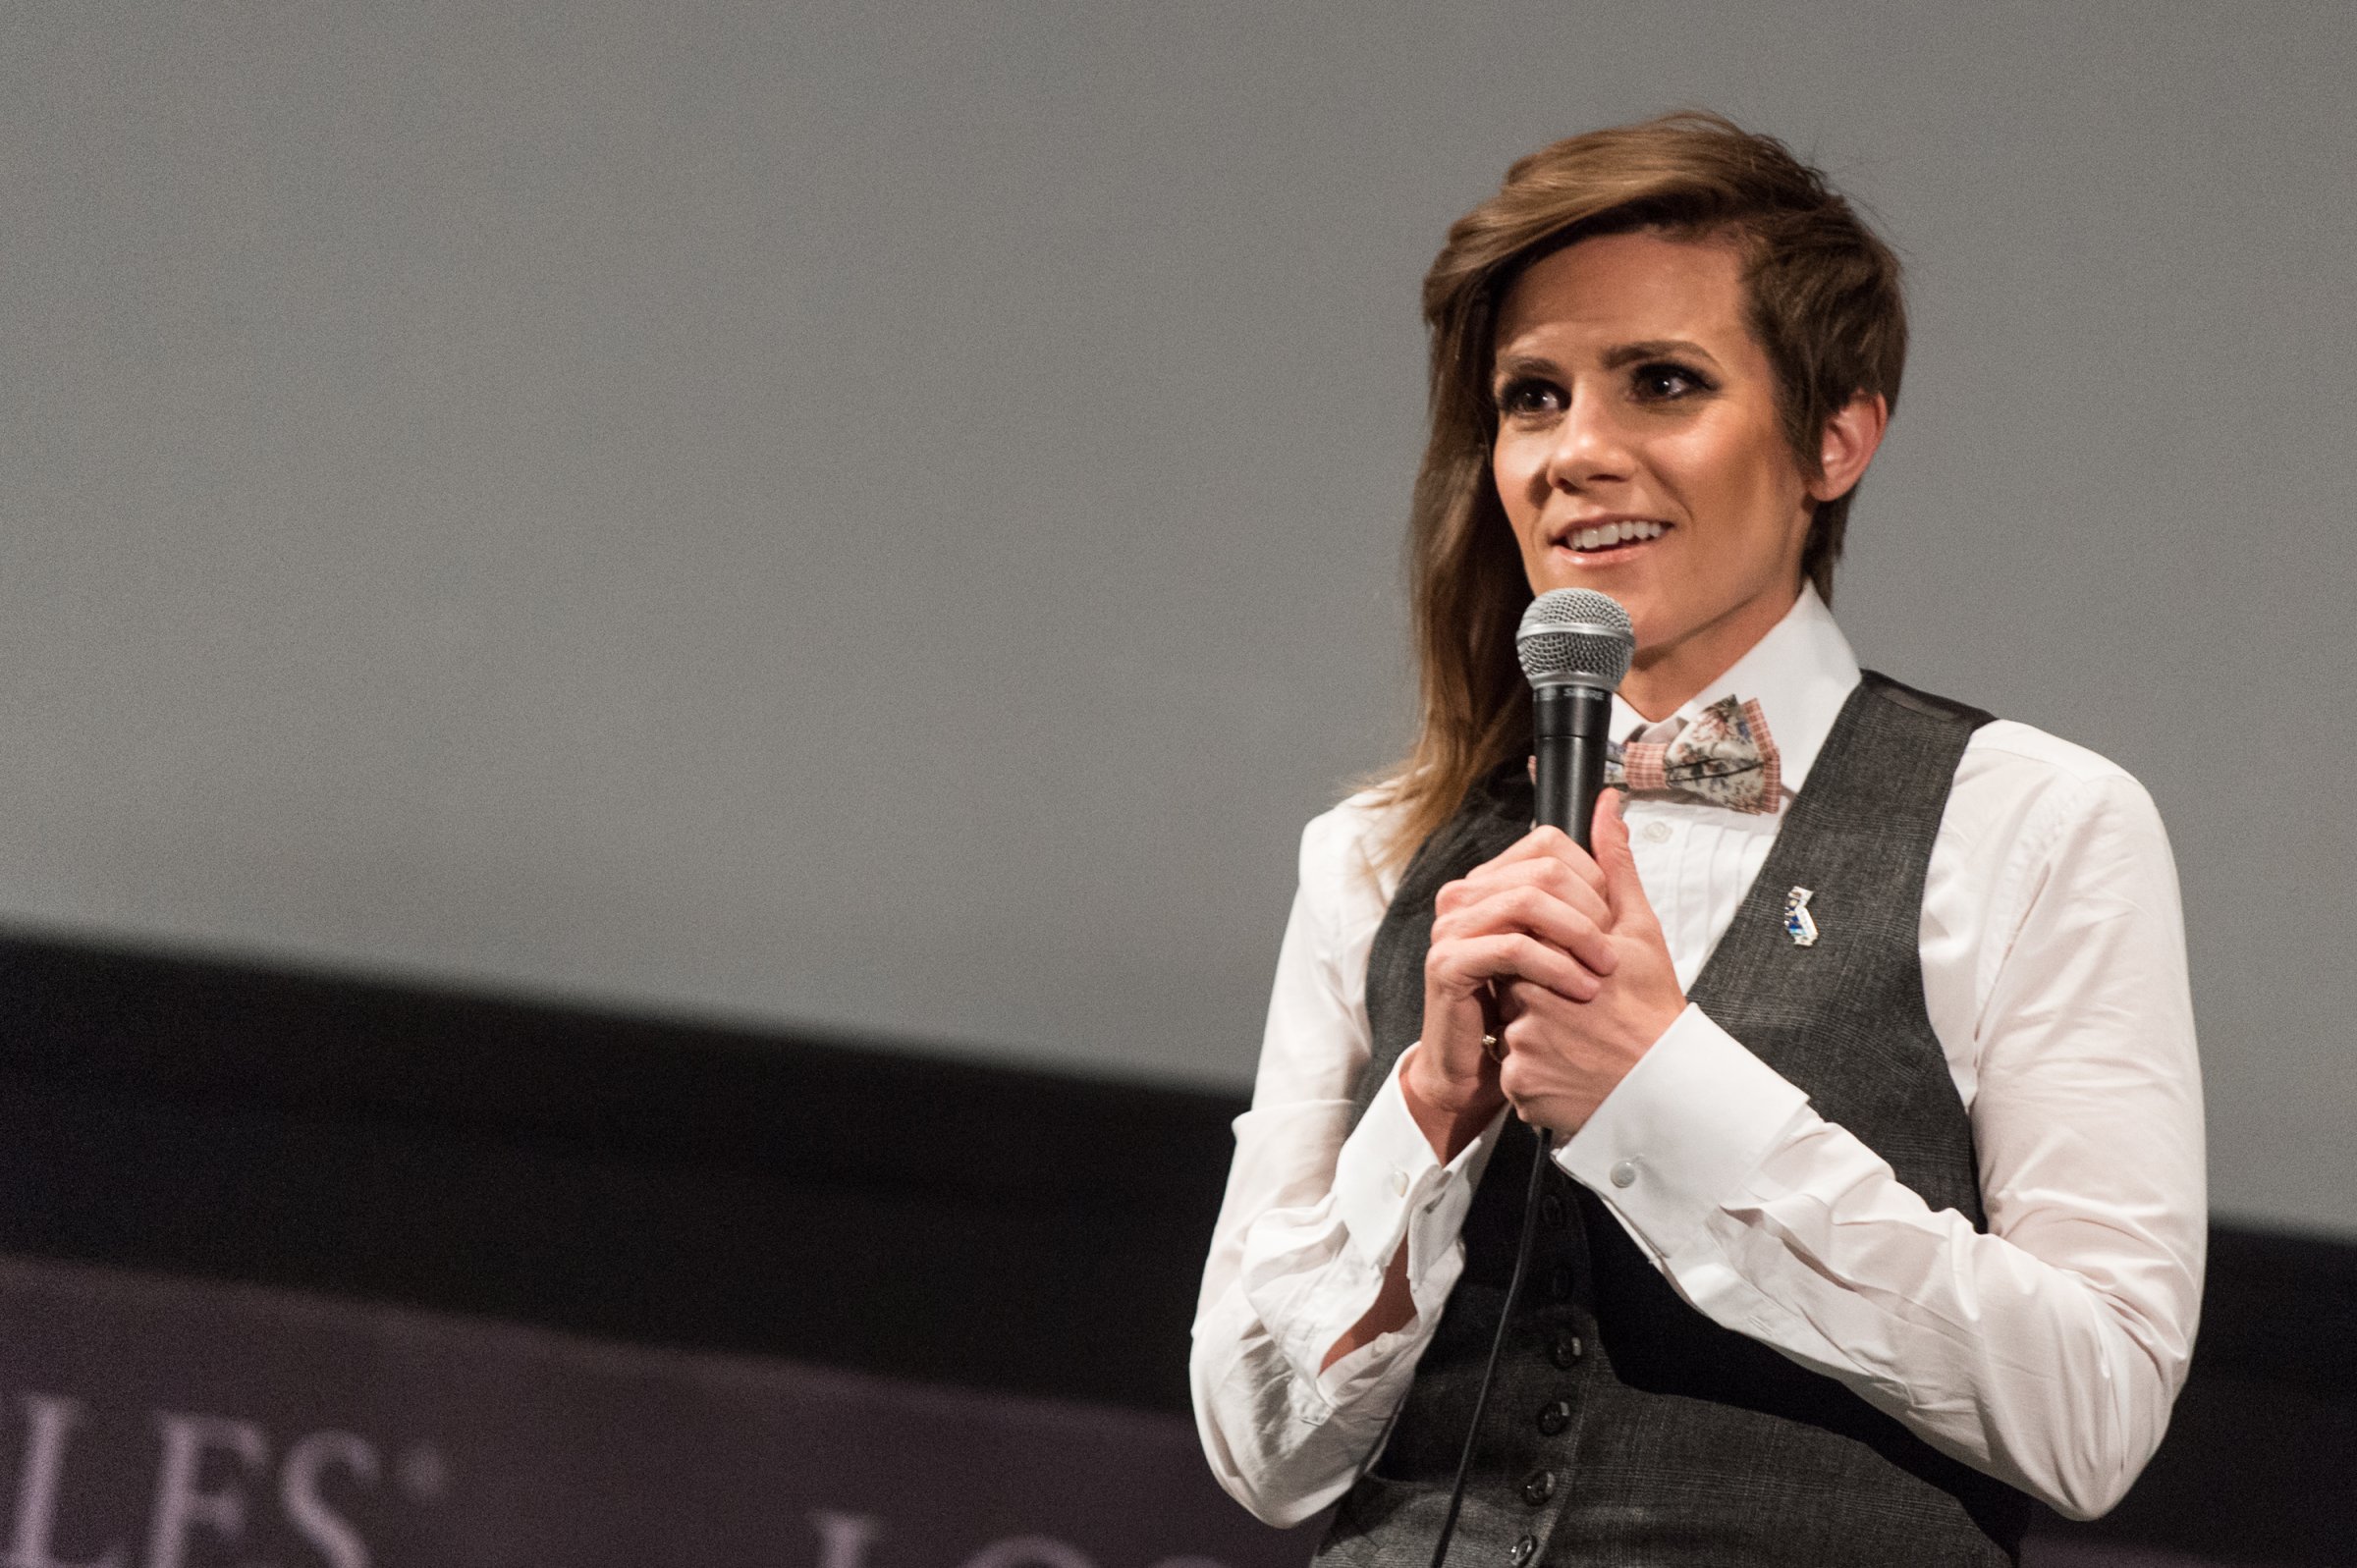 Comedian Cameron Esposito speaks onstage at the Seeso original screening of 'Take My Wife' at Los Angeles Film School on August 9, 2016 in Los Angeles, California.